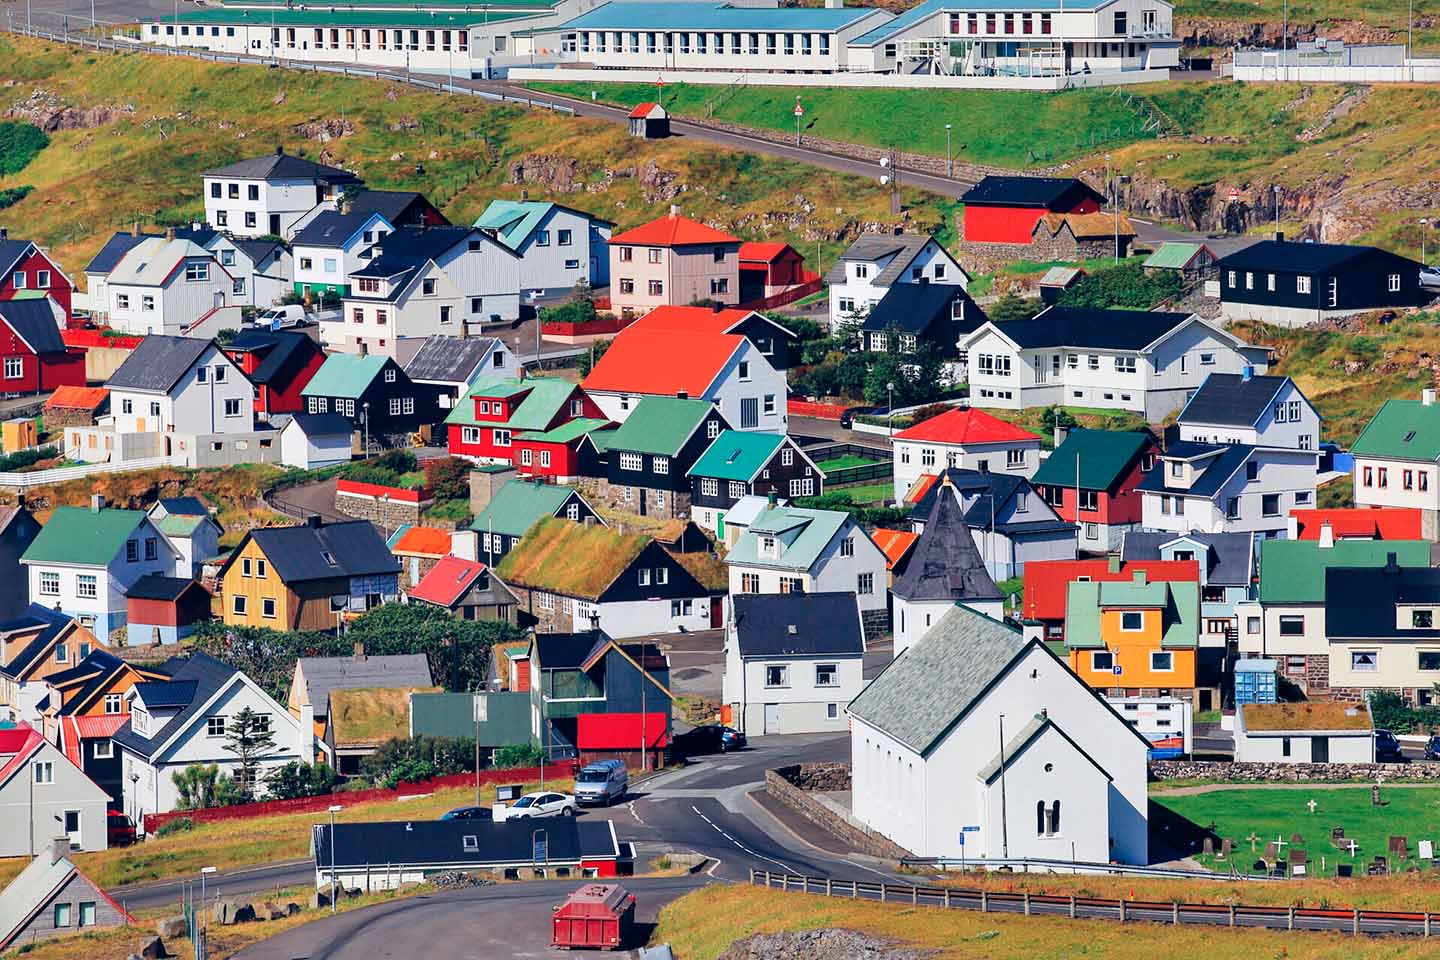 Faroe Islands has 18 islands with 53.500 inhabitants.<br />
Get to know more about the Faroes 